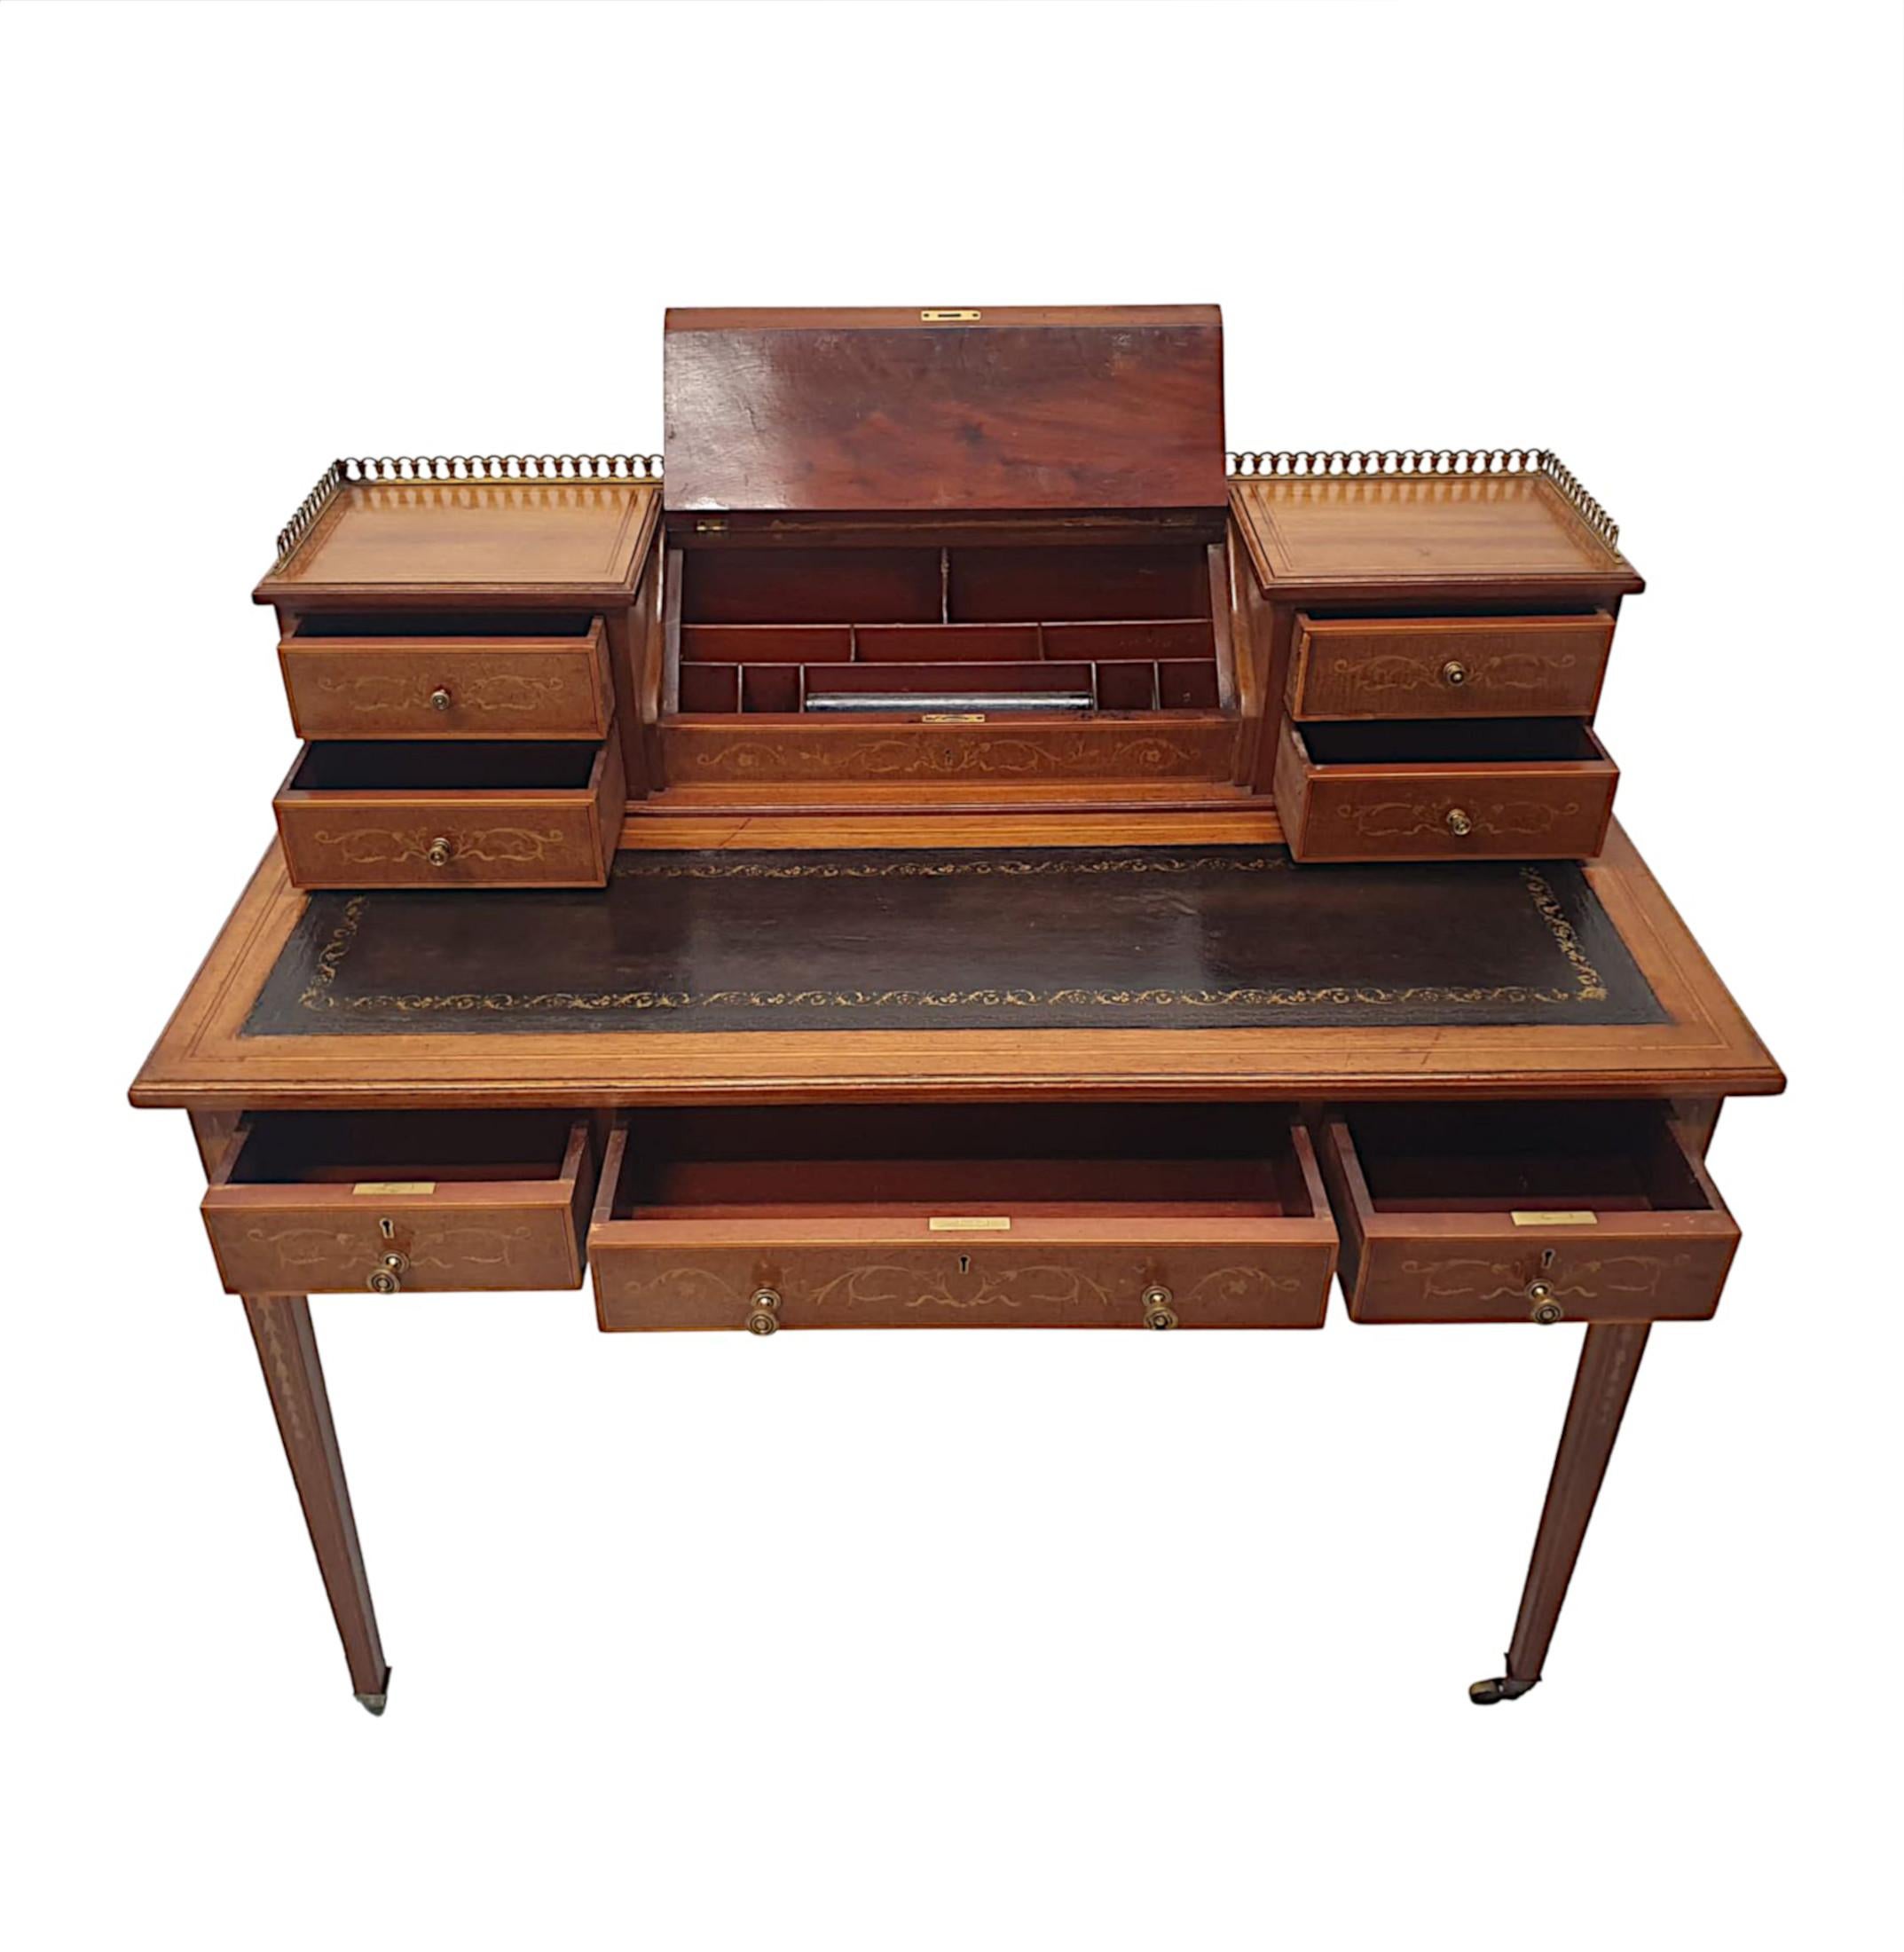 20th Century Very Fine Edwardian Desk Attributed to Edward and Roberts For Sale